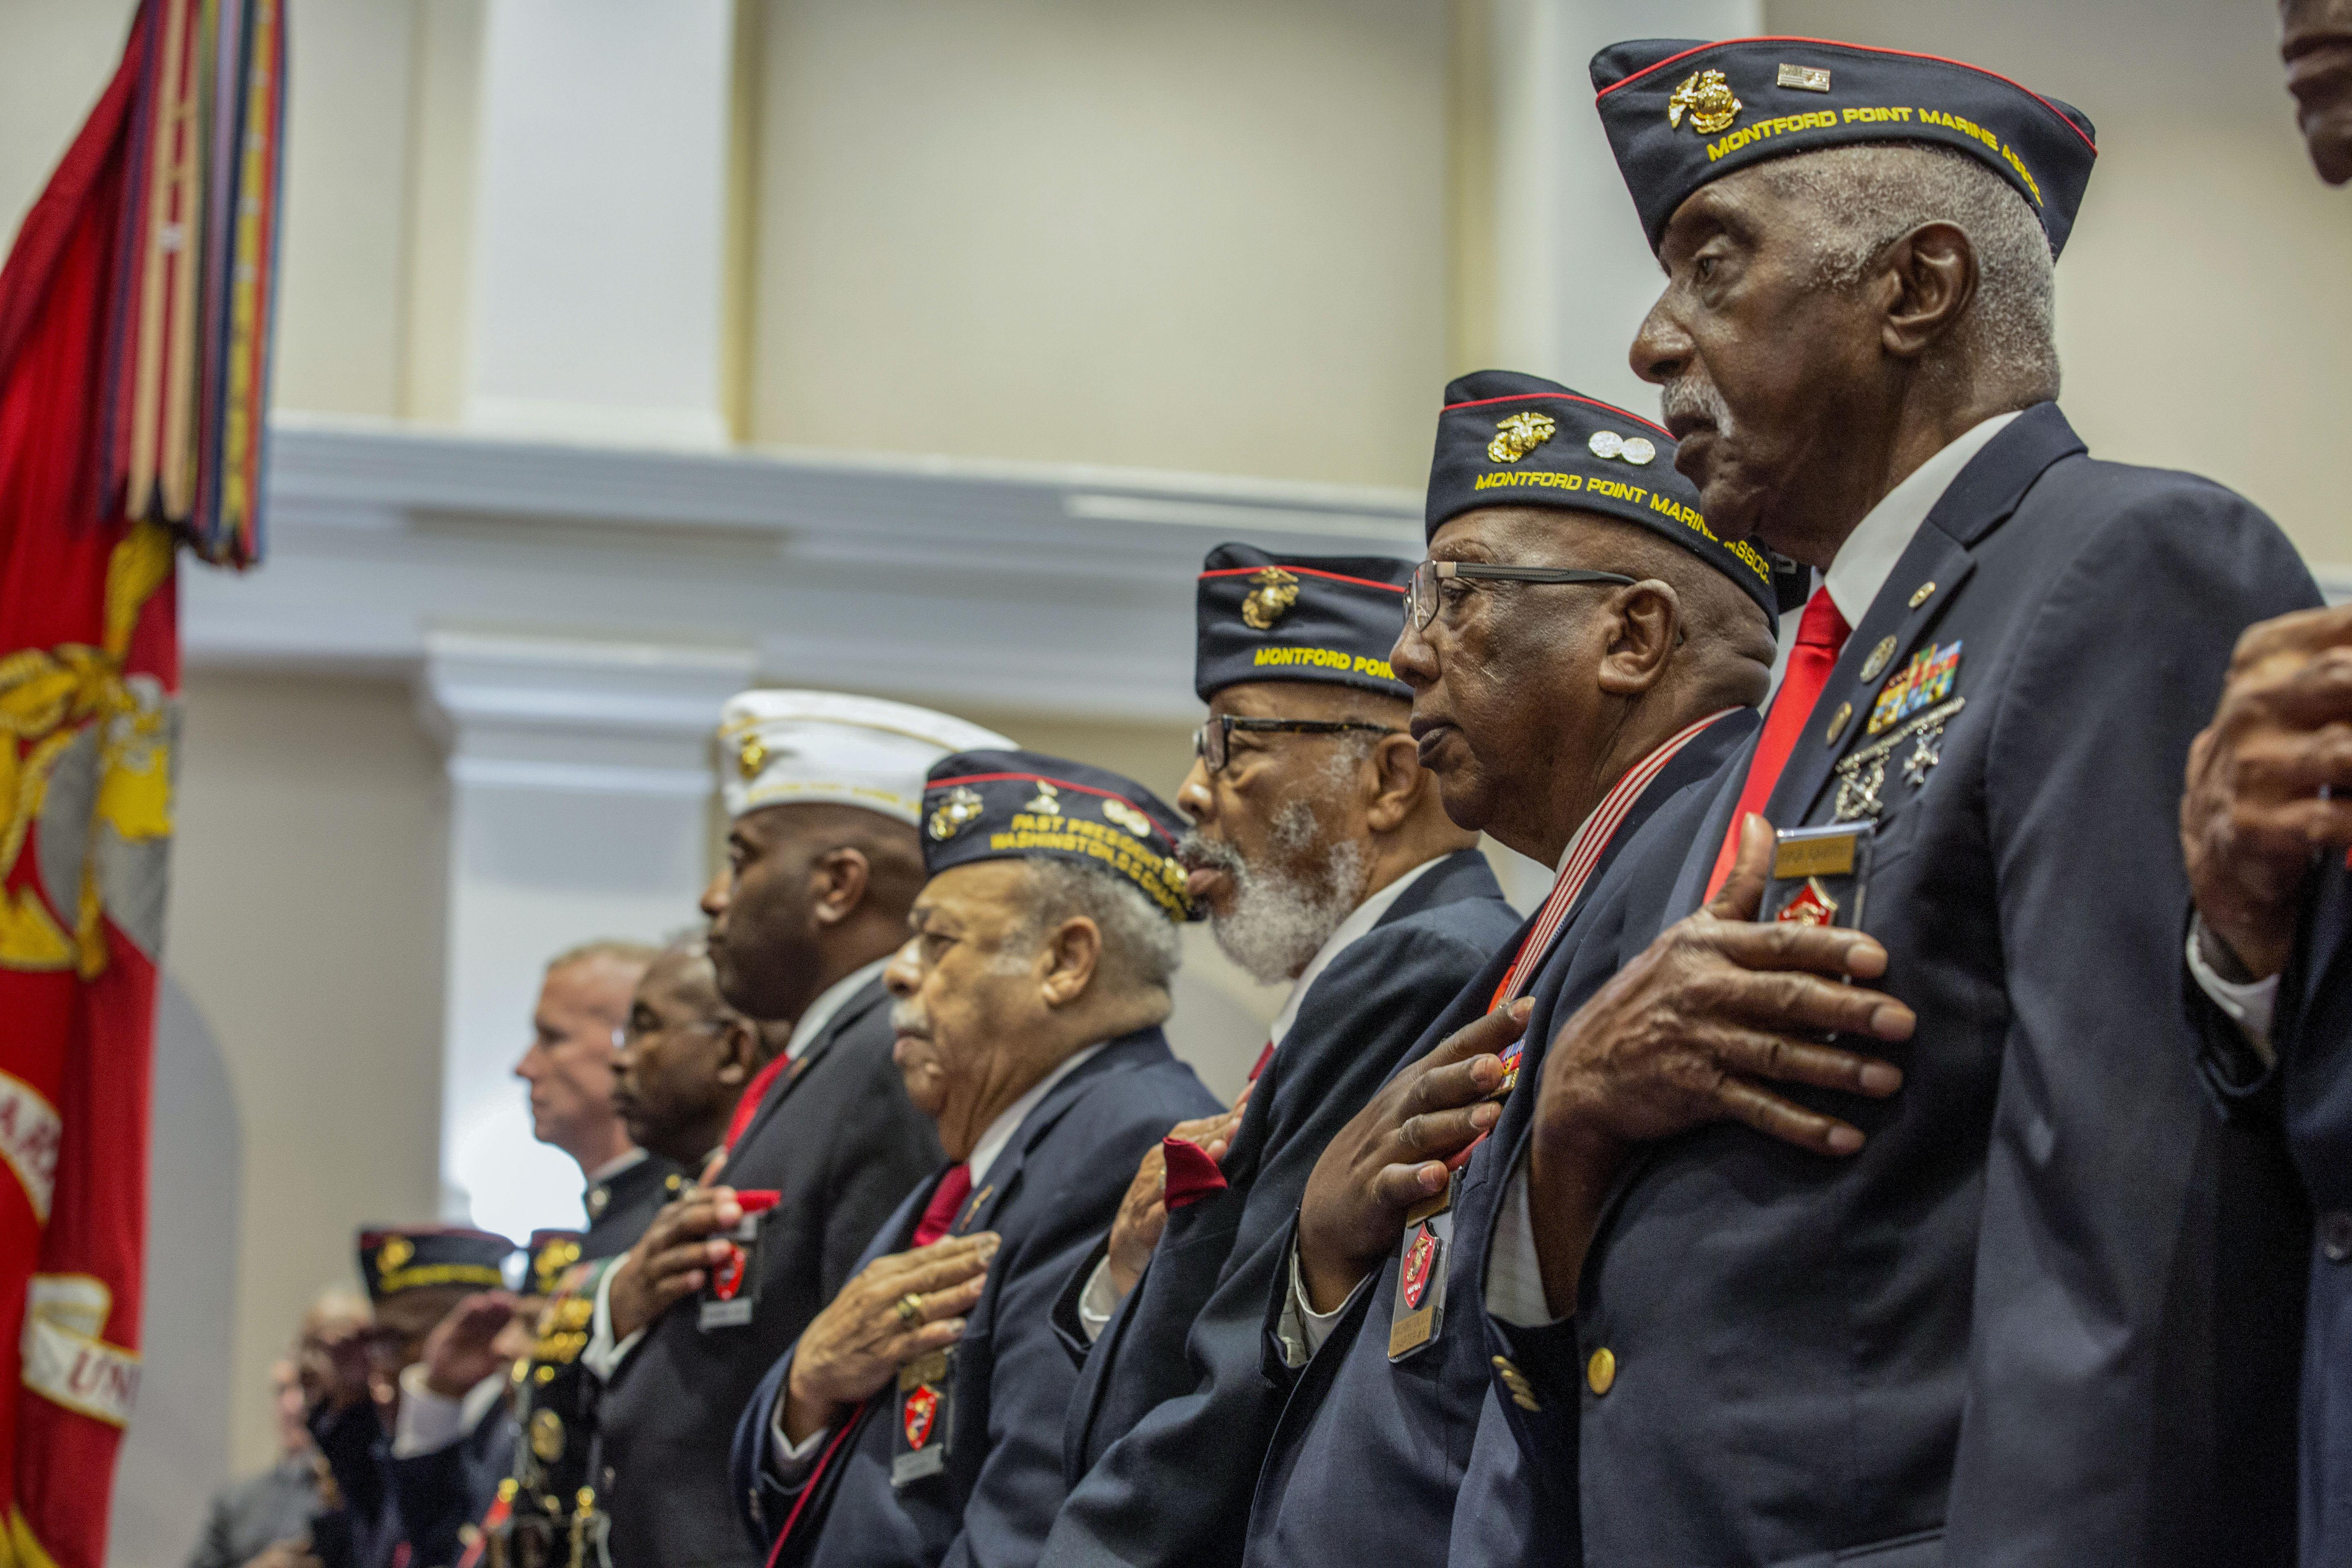 One of the first Black Marines finally gets his Congressional Gold Medal